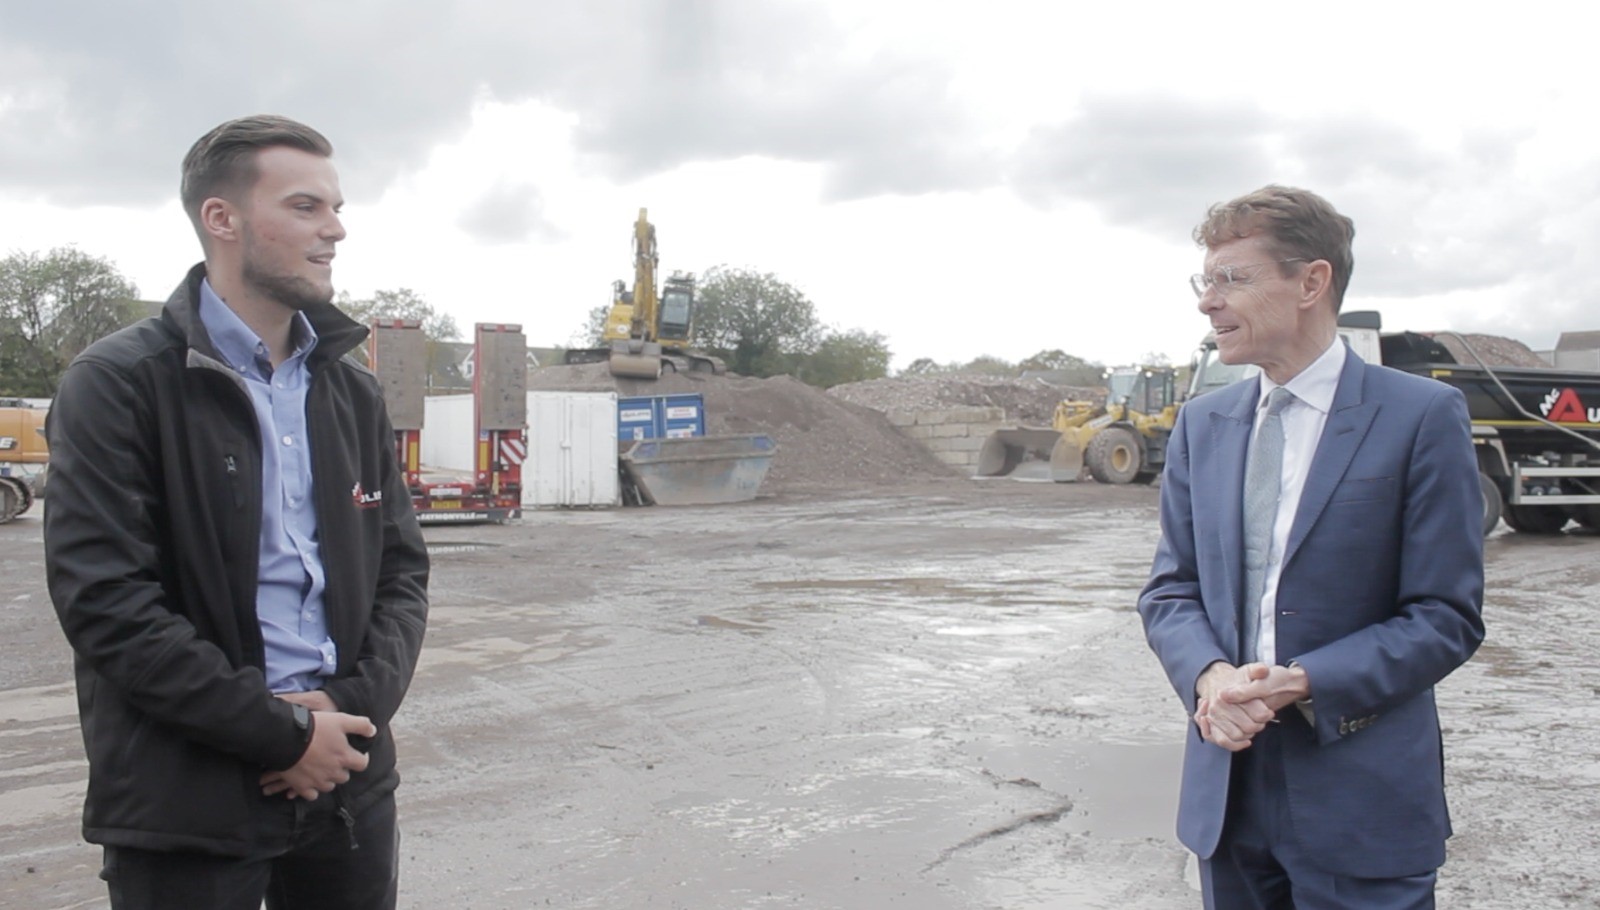 Mayor Andy Street meets apprentice Lewis Trout who is working on HS2 for Wolverhampton based firm McAuliffe